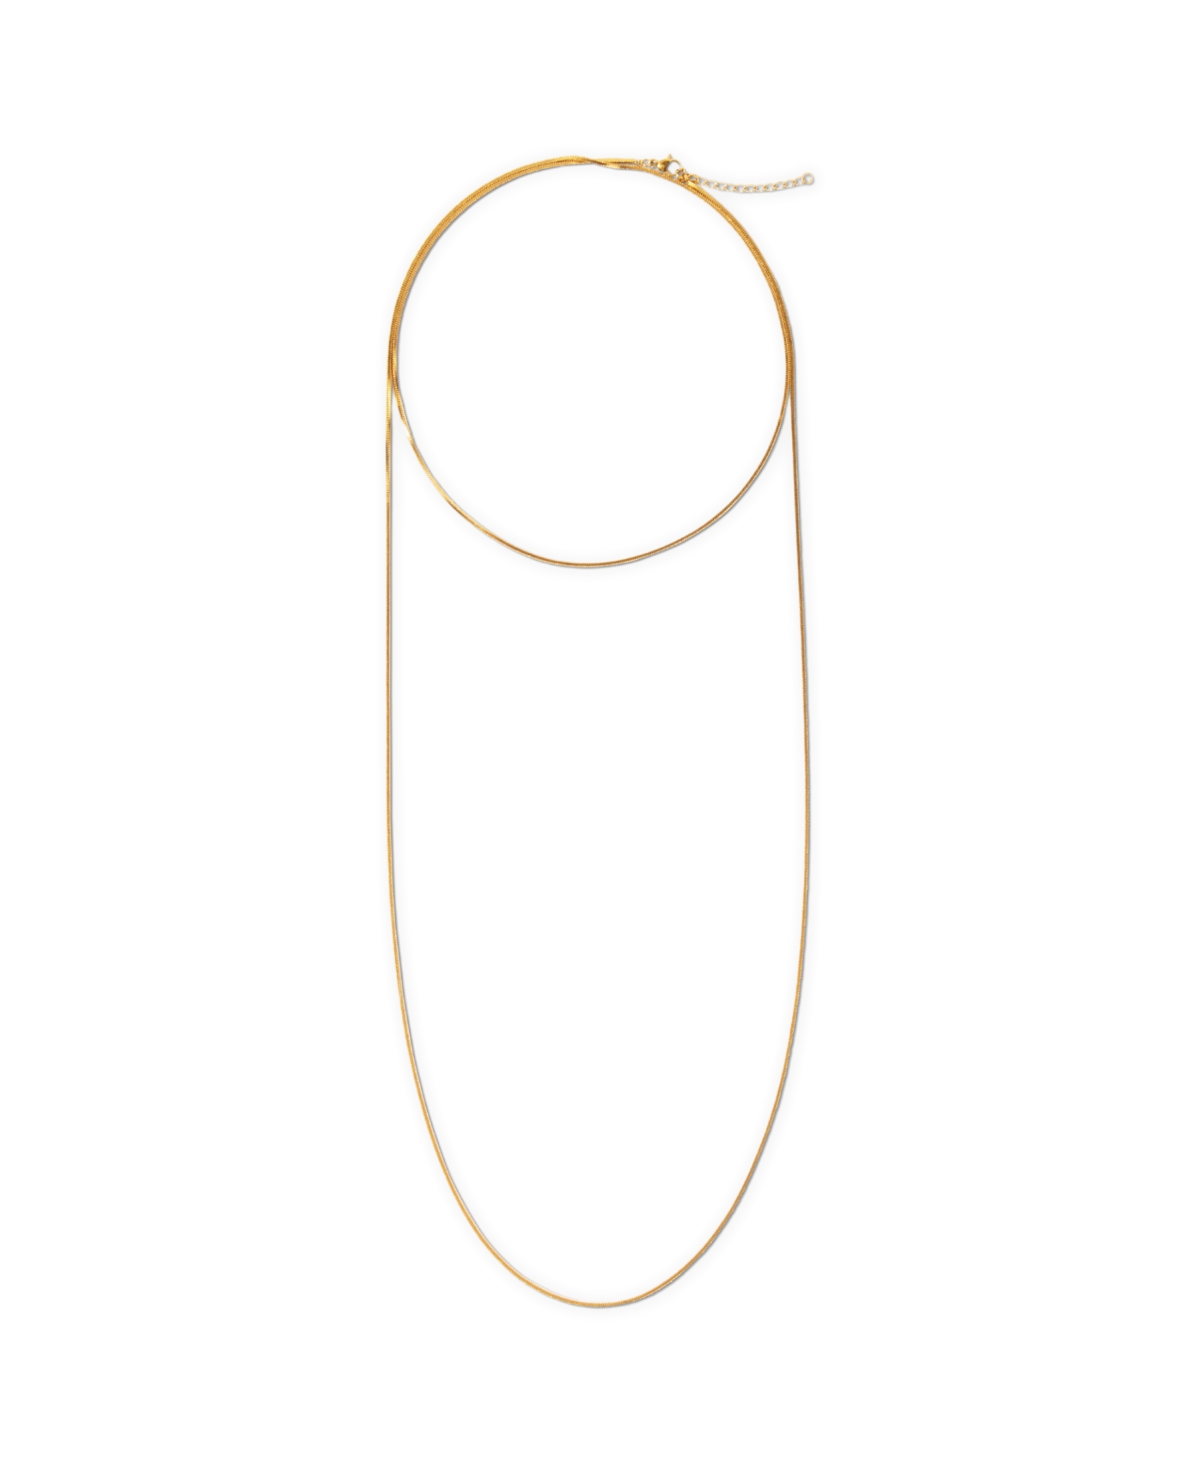 Palmer Wrap Snake Chain Necklace - Gold